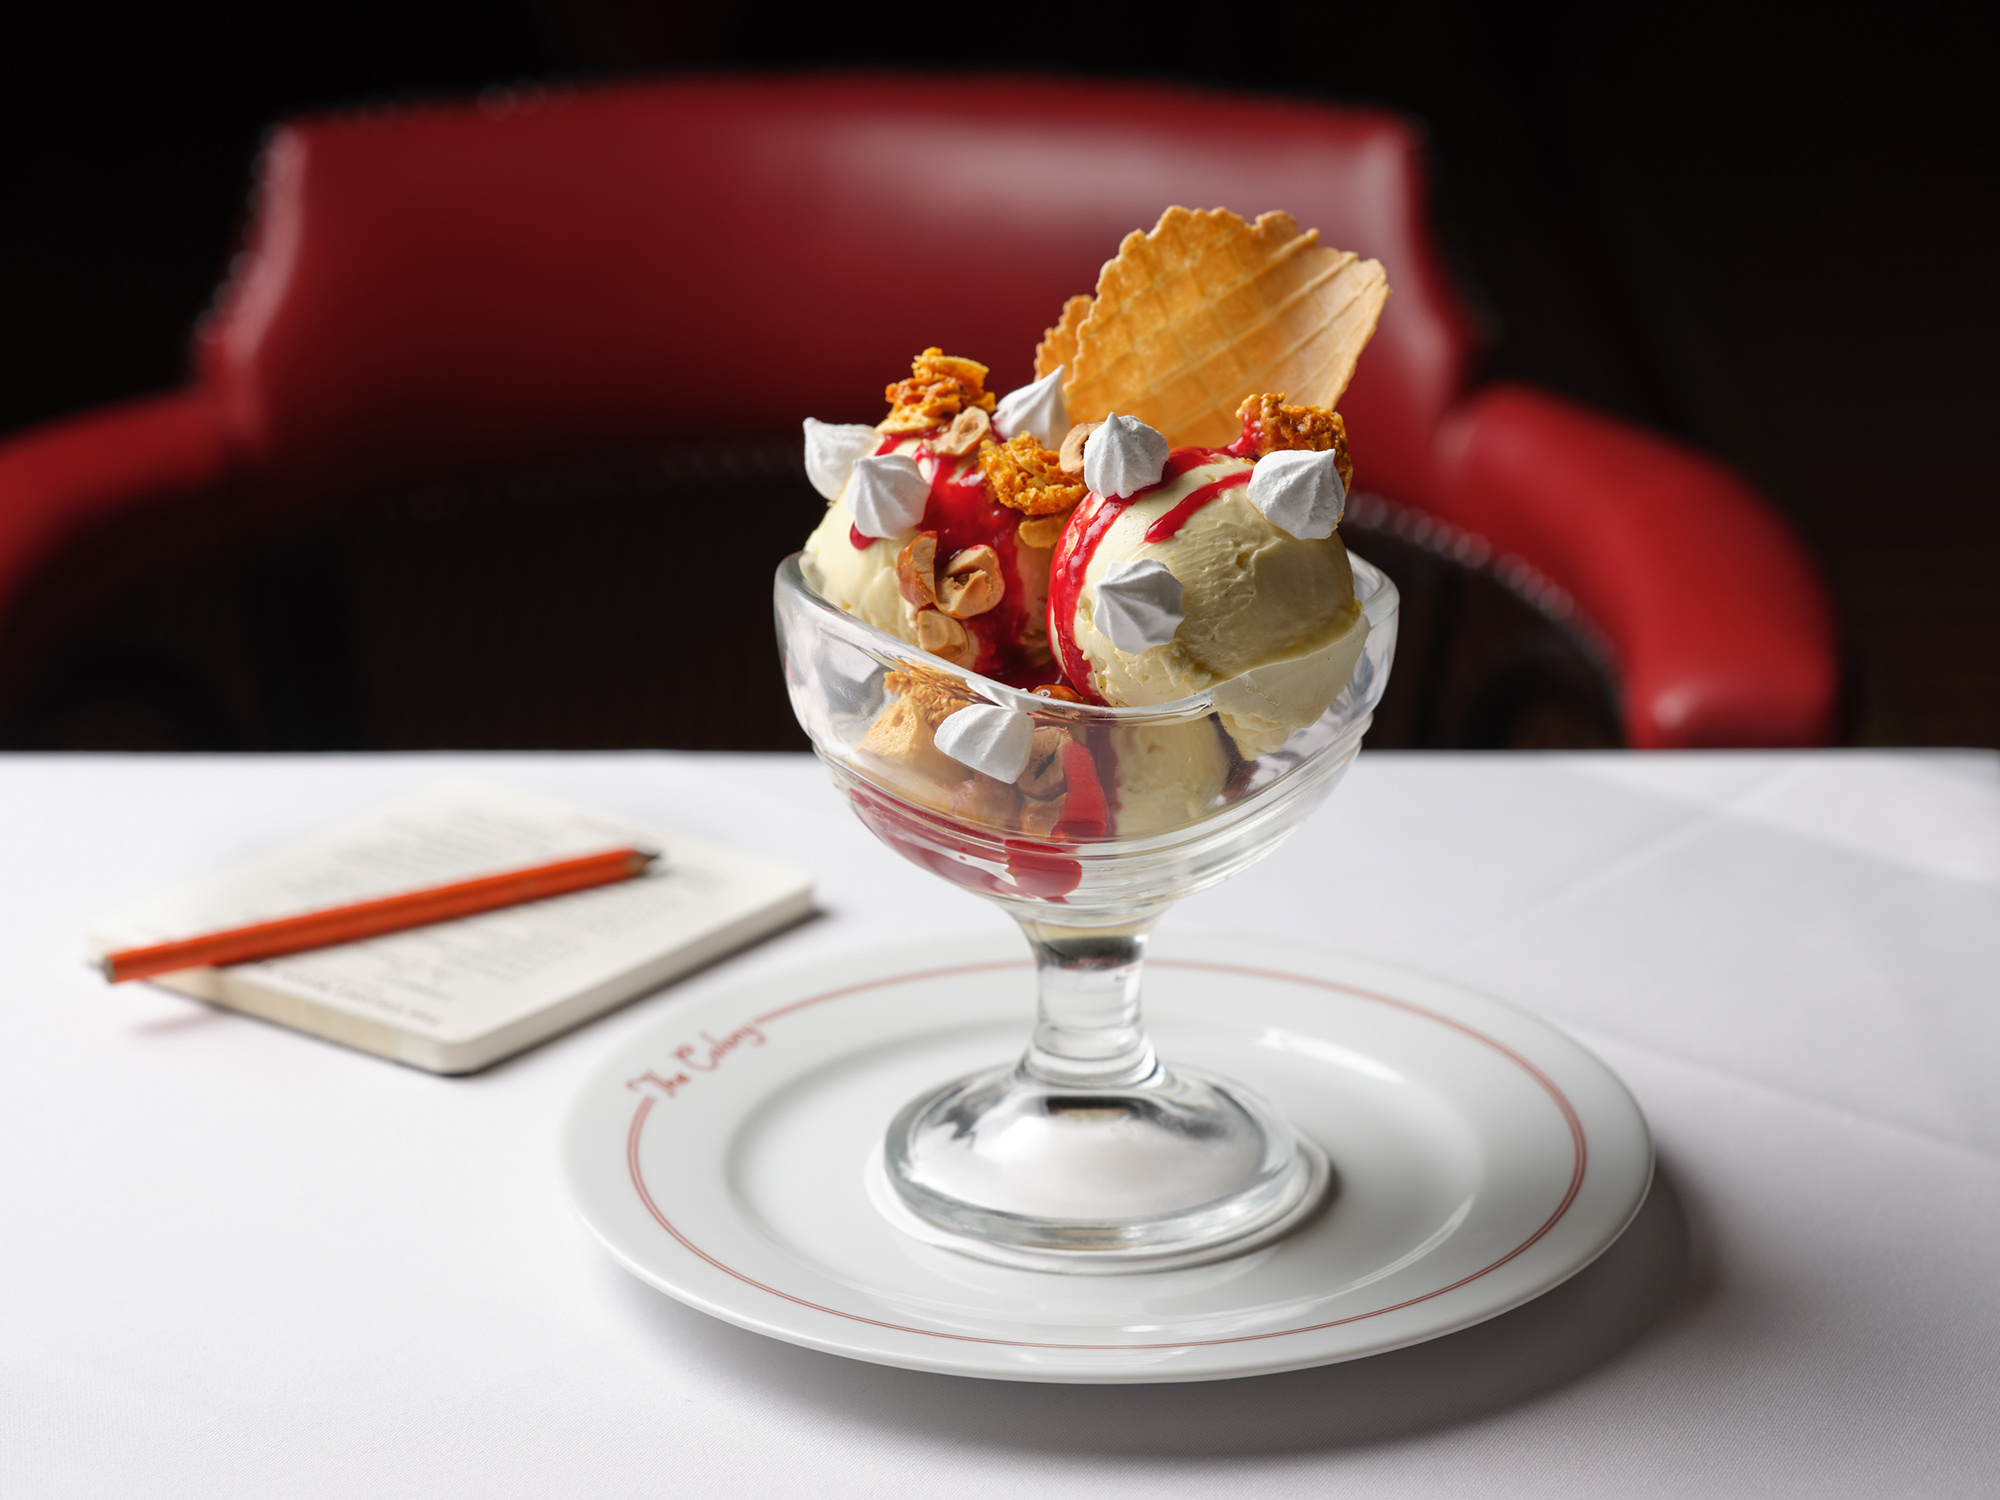 Bespoke sundaes are a highlight of the dessert menu at The Colony Grill Room